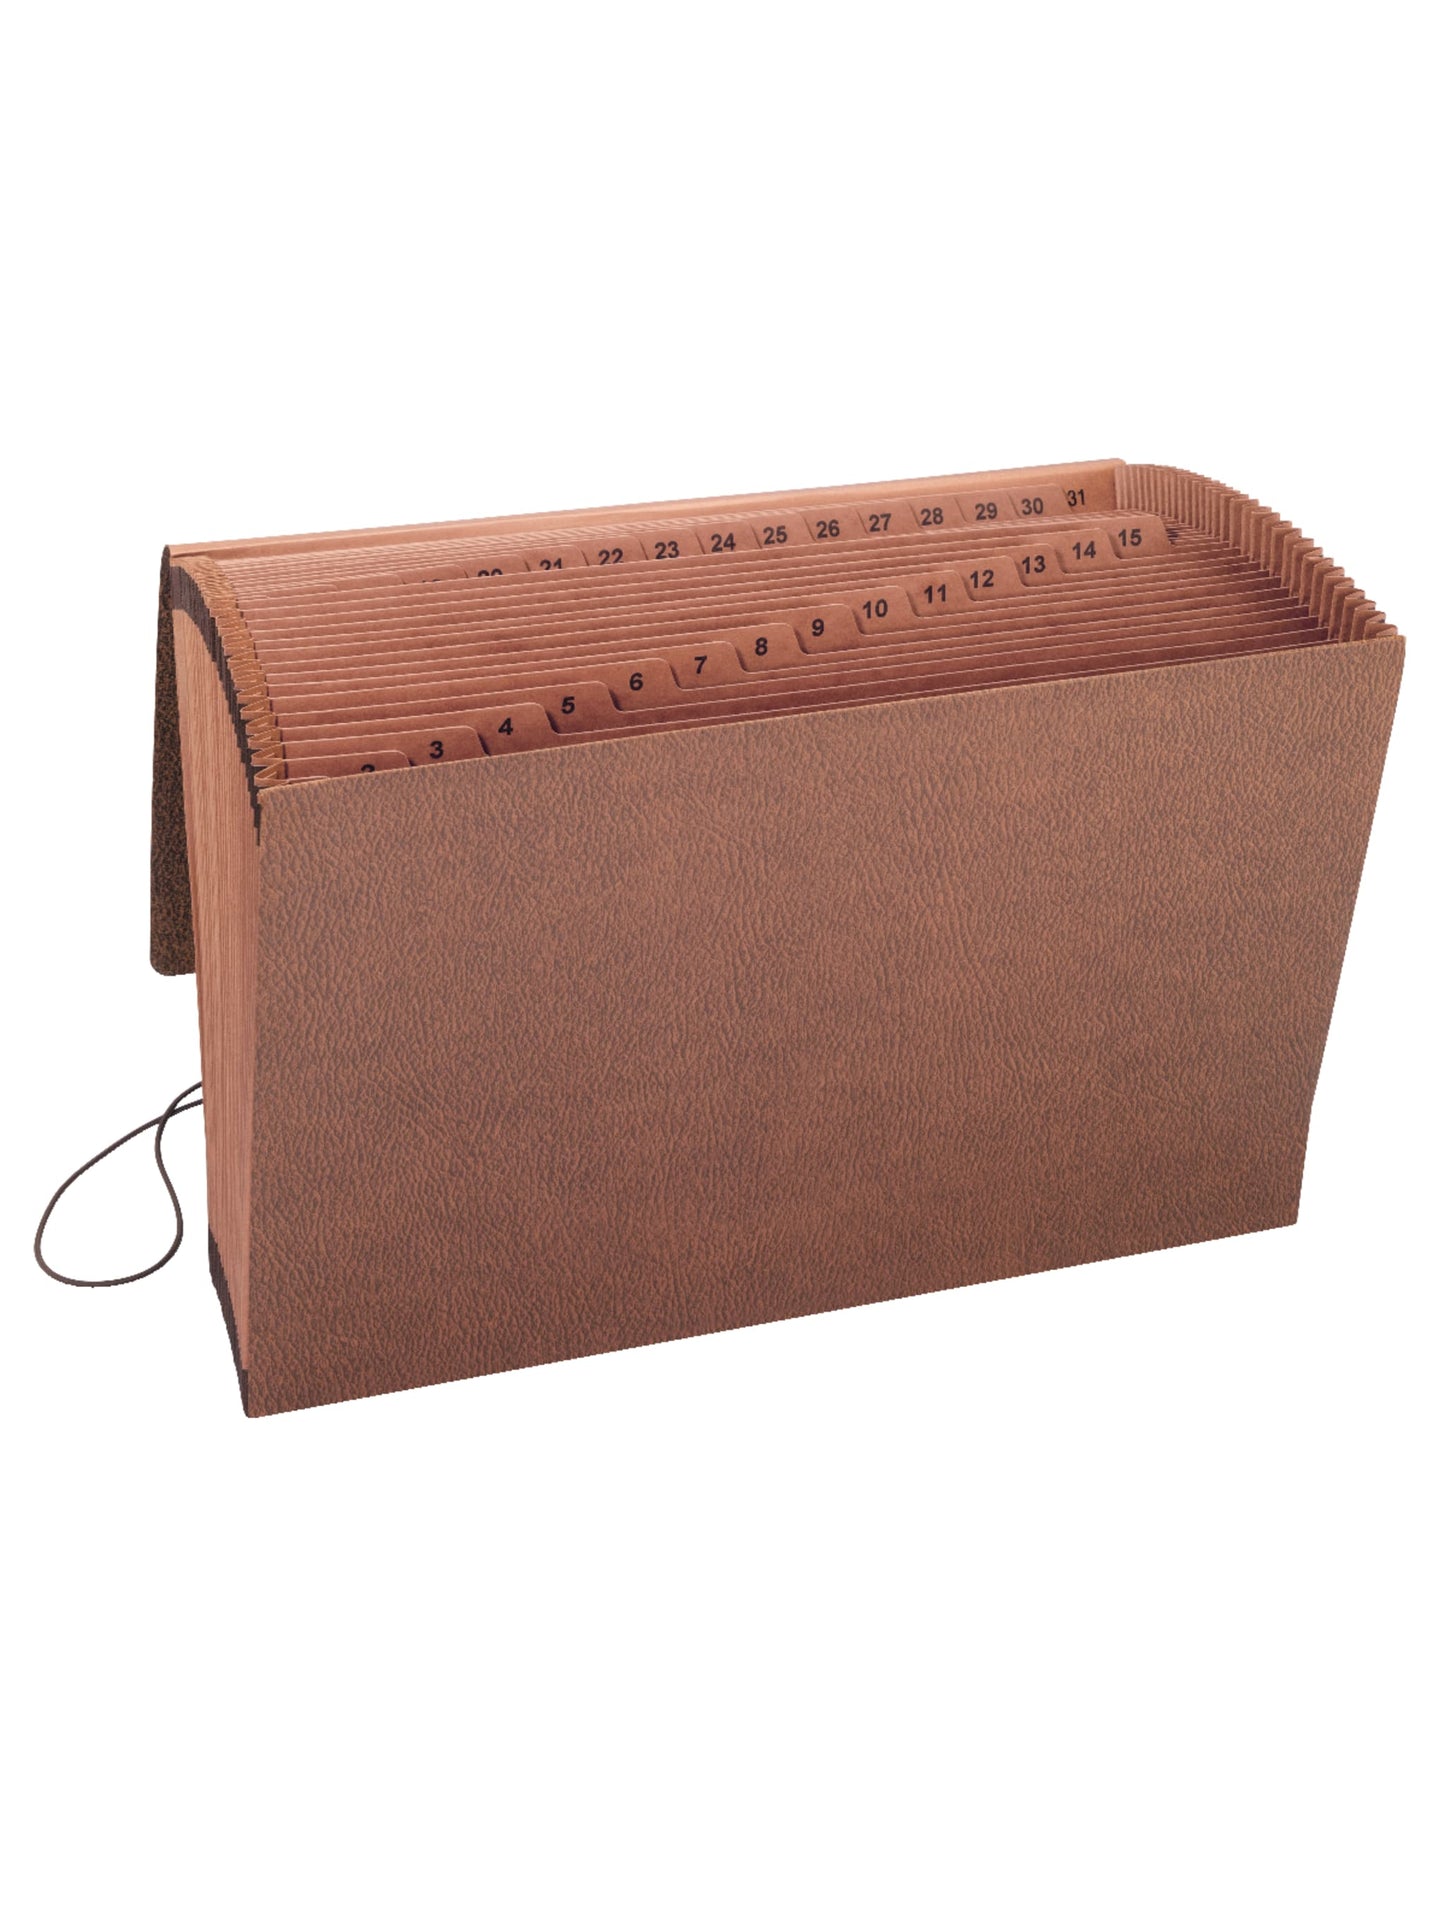 TUFF® Redrope Expanding Files, 31 Pockets, Daily 1-31, Brown Color, Legal Size, Set of 1, 086486703697